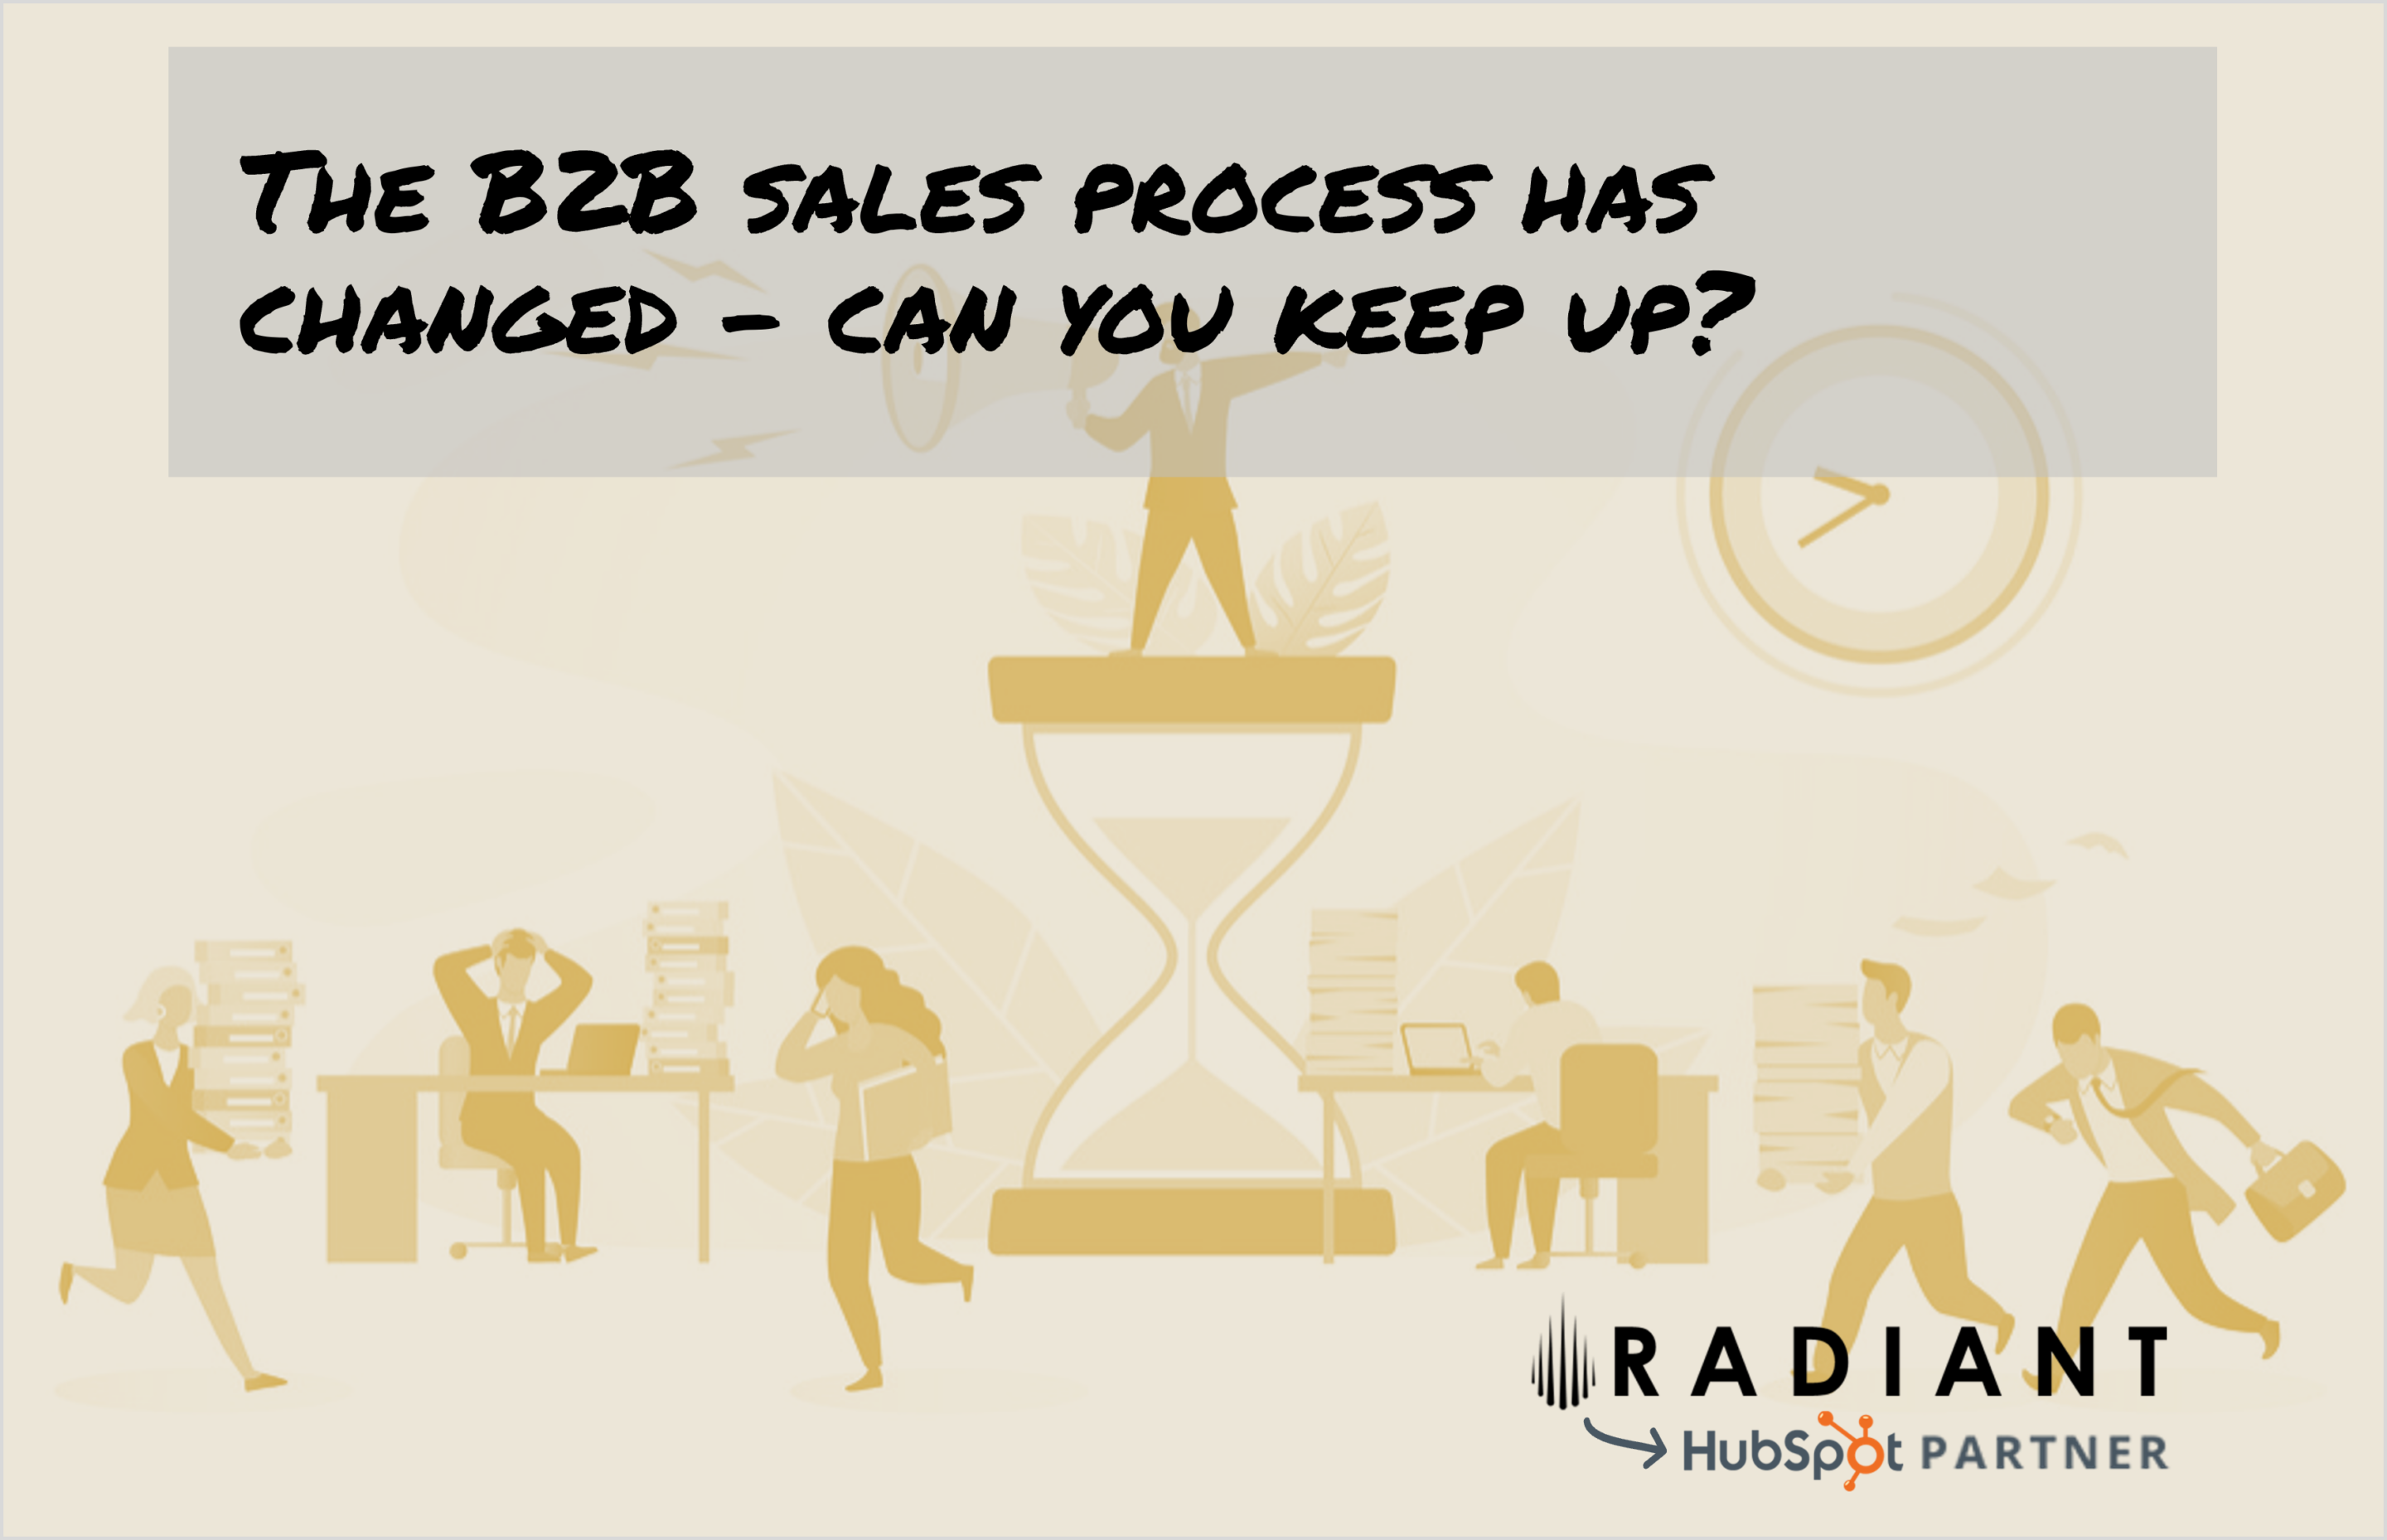 The B2B sales process has changed - can you keep up? Research has become an essential part of the buying process. And HubSpot can help.